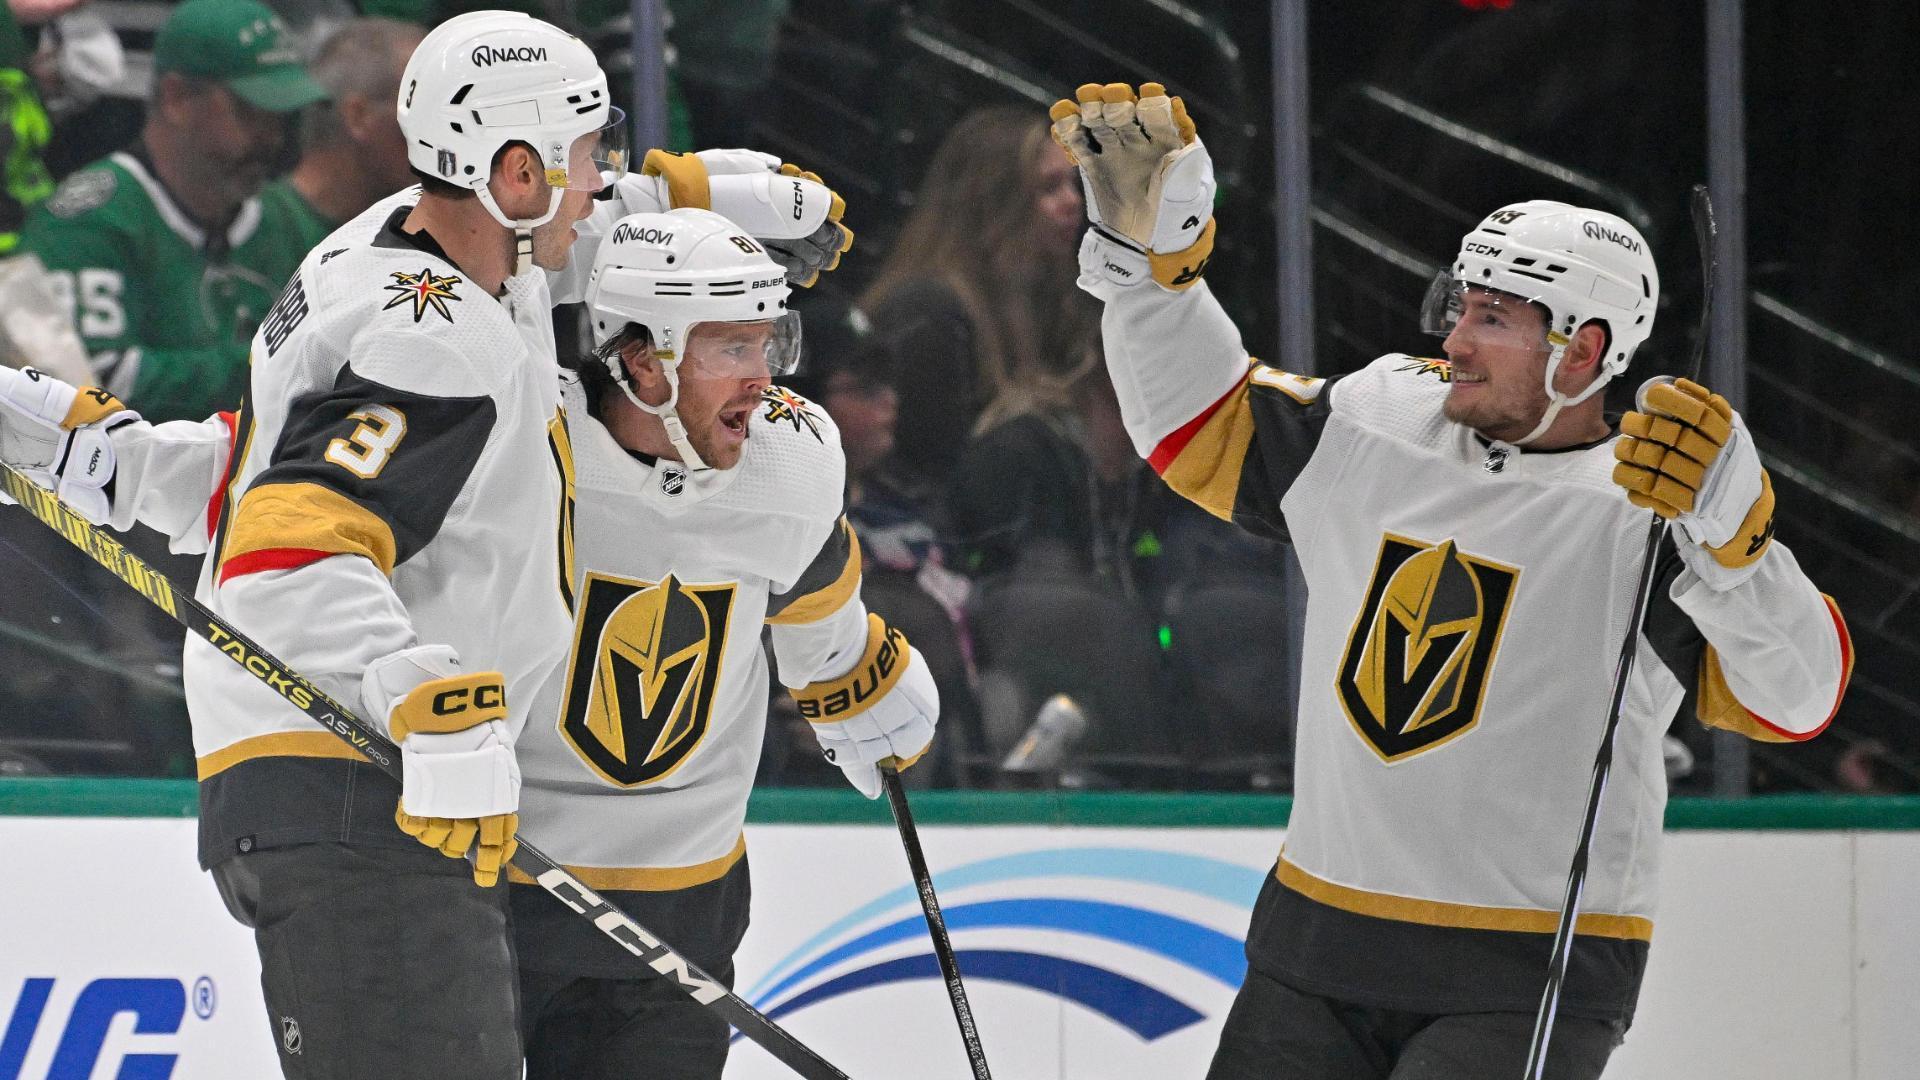 Vegas captain Stone scores quick in return and defending Cup champions open with 4-3 win at Dallas